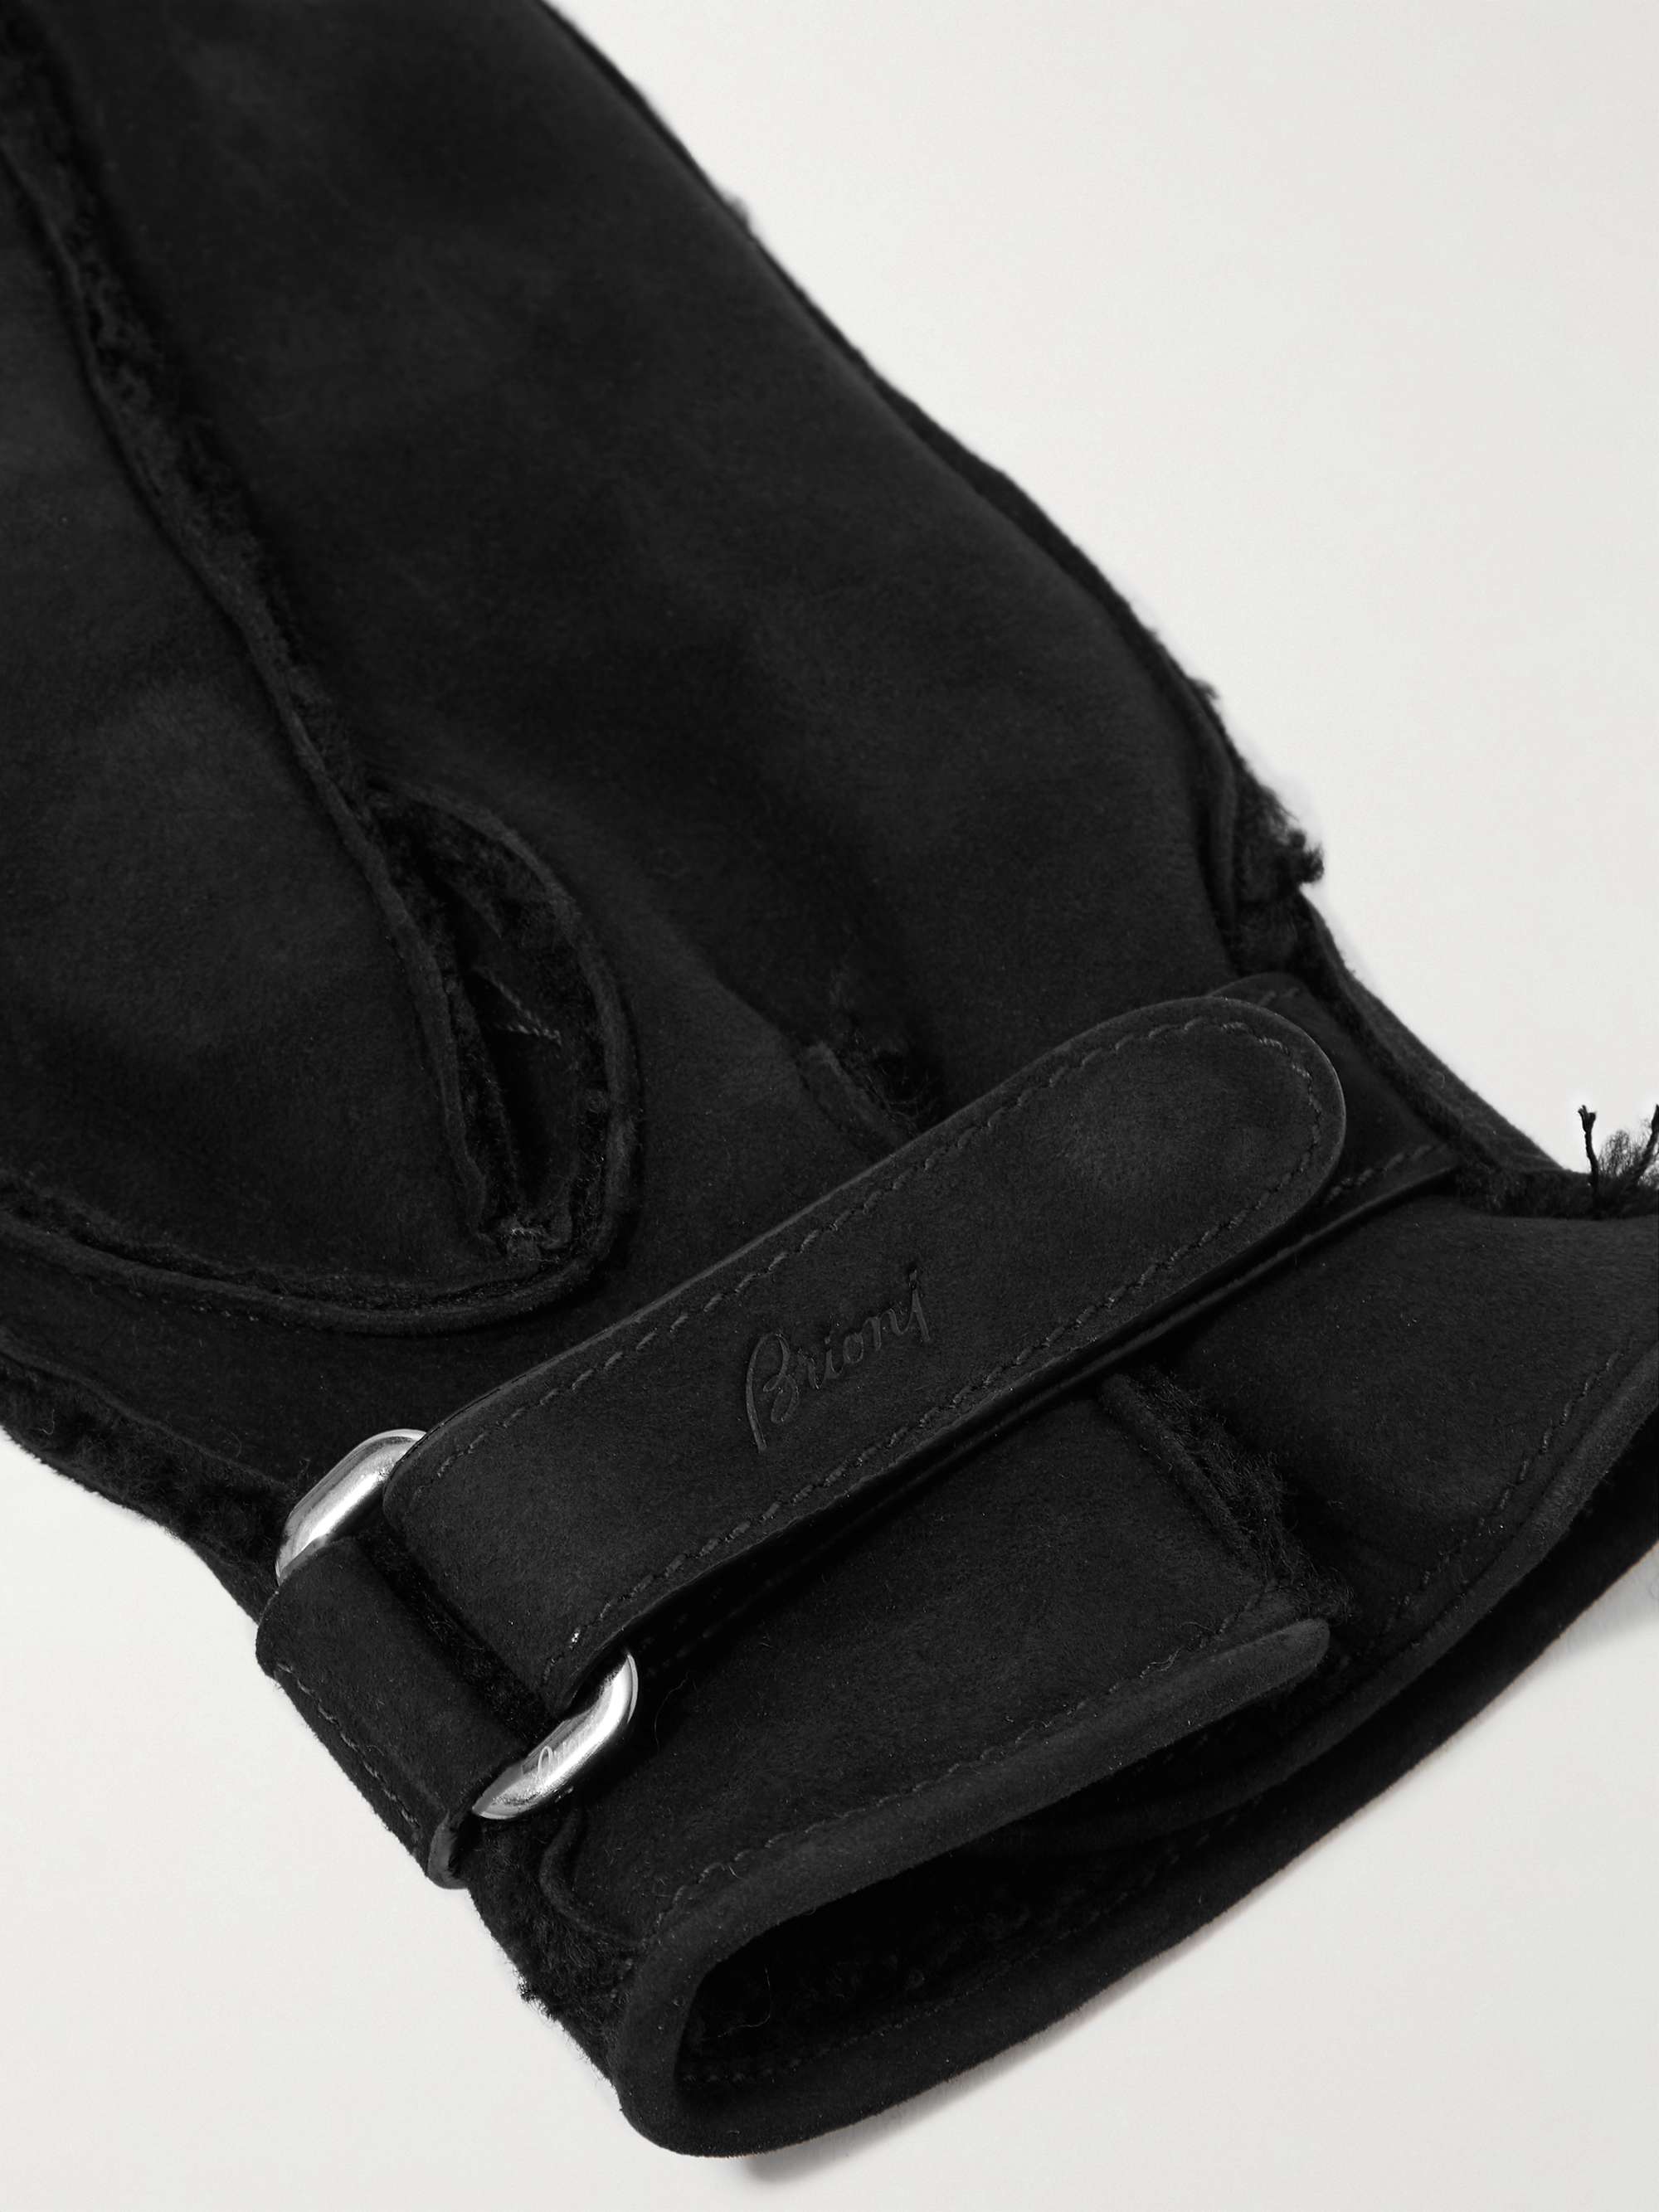 BRIONI Shearling Gloves